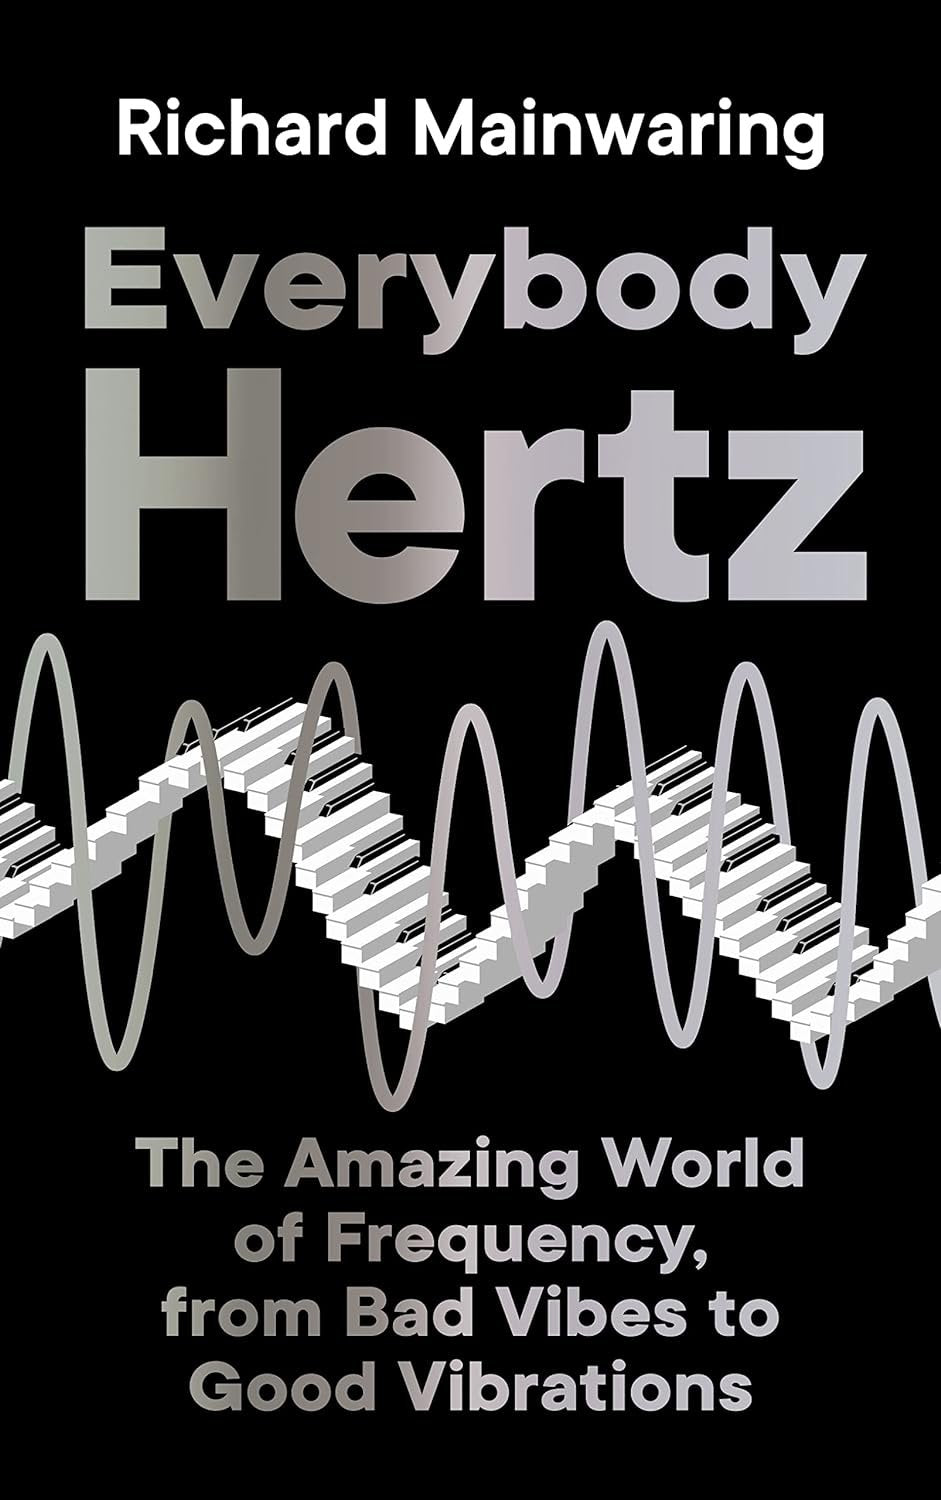 A book cover titled "Everybody Hertz" by Richard Mainwaring, with a design featuring bold text and a stylized white sine wave on a black background, exploring the concept of strange frequencies from the author.